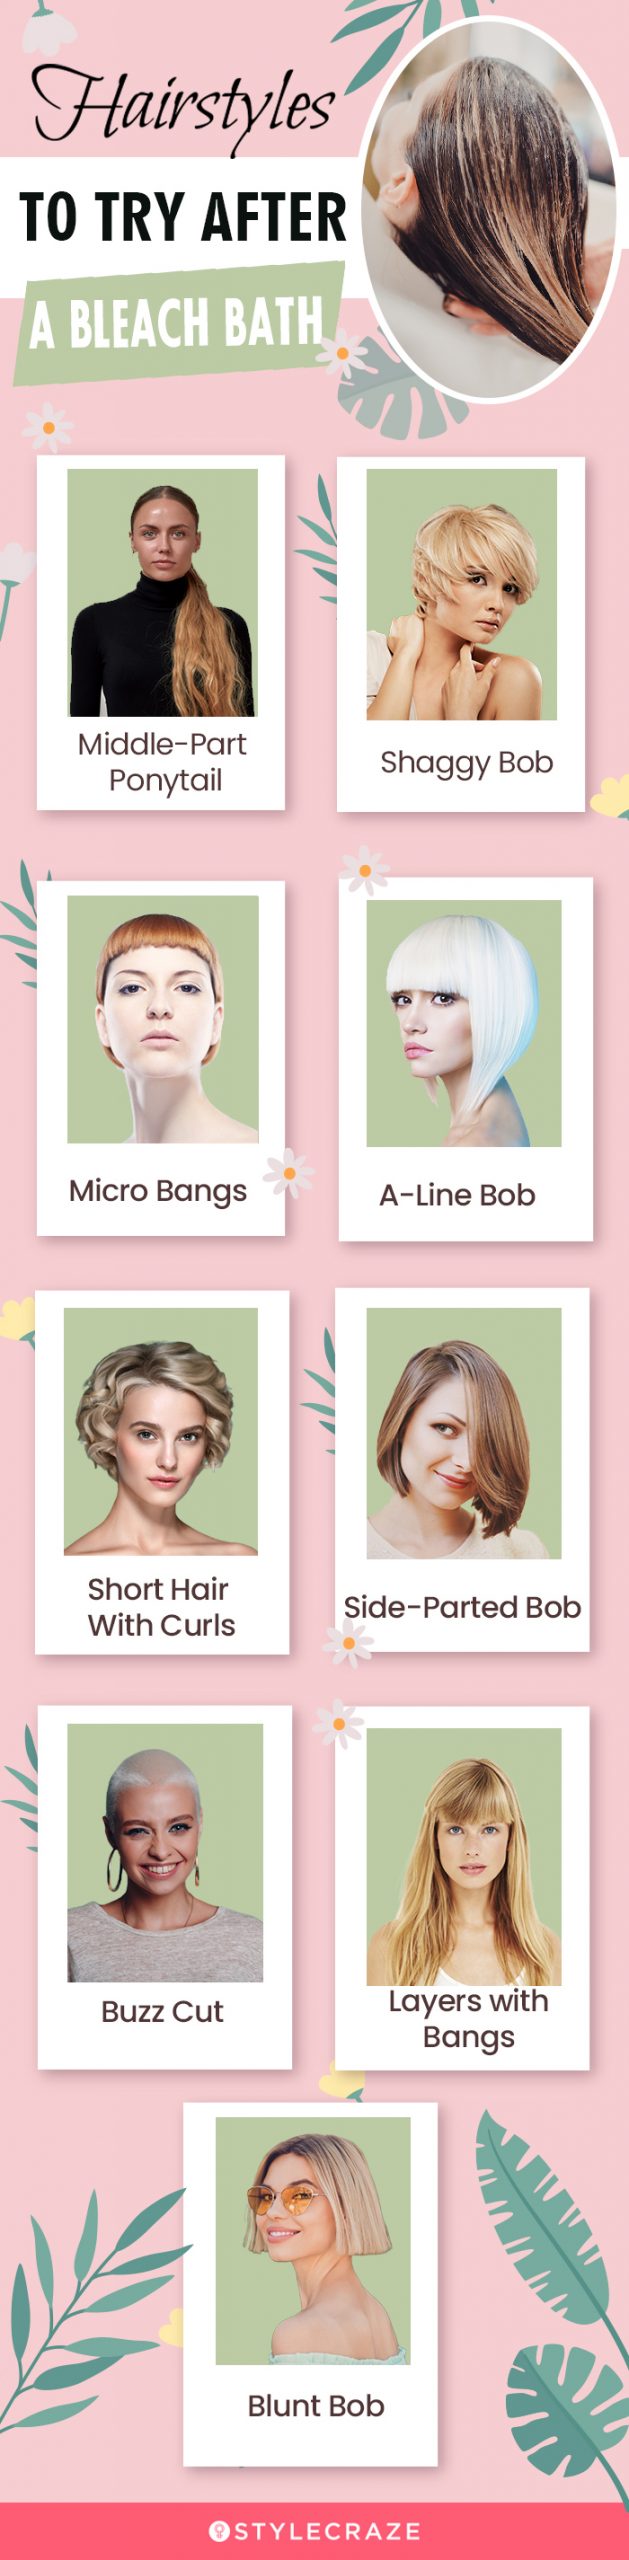 hairstyles to try after a bleach bath [infographic]